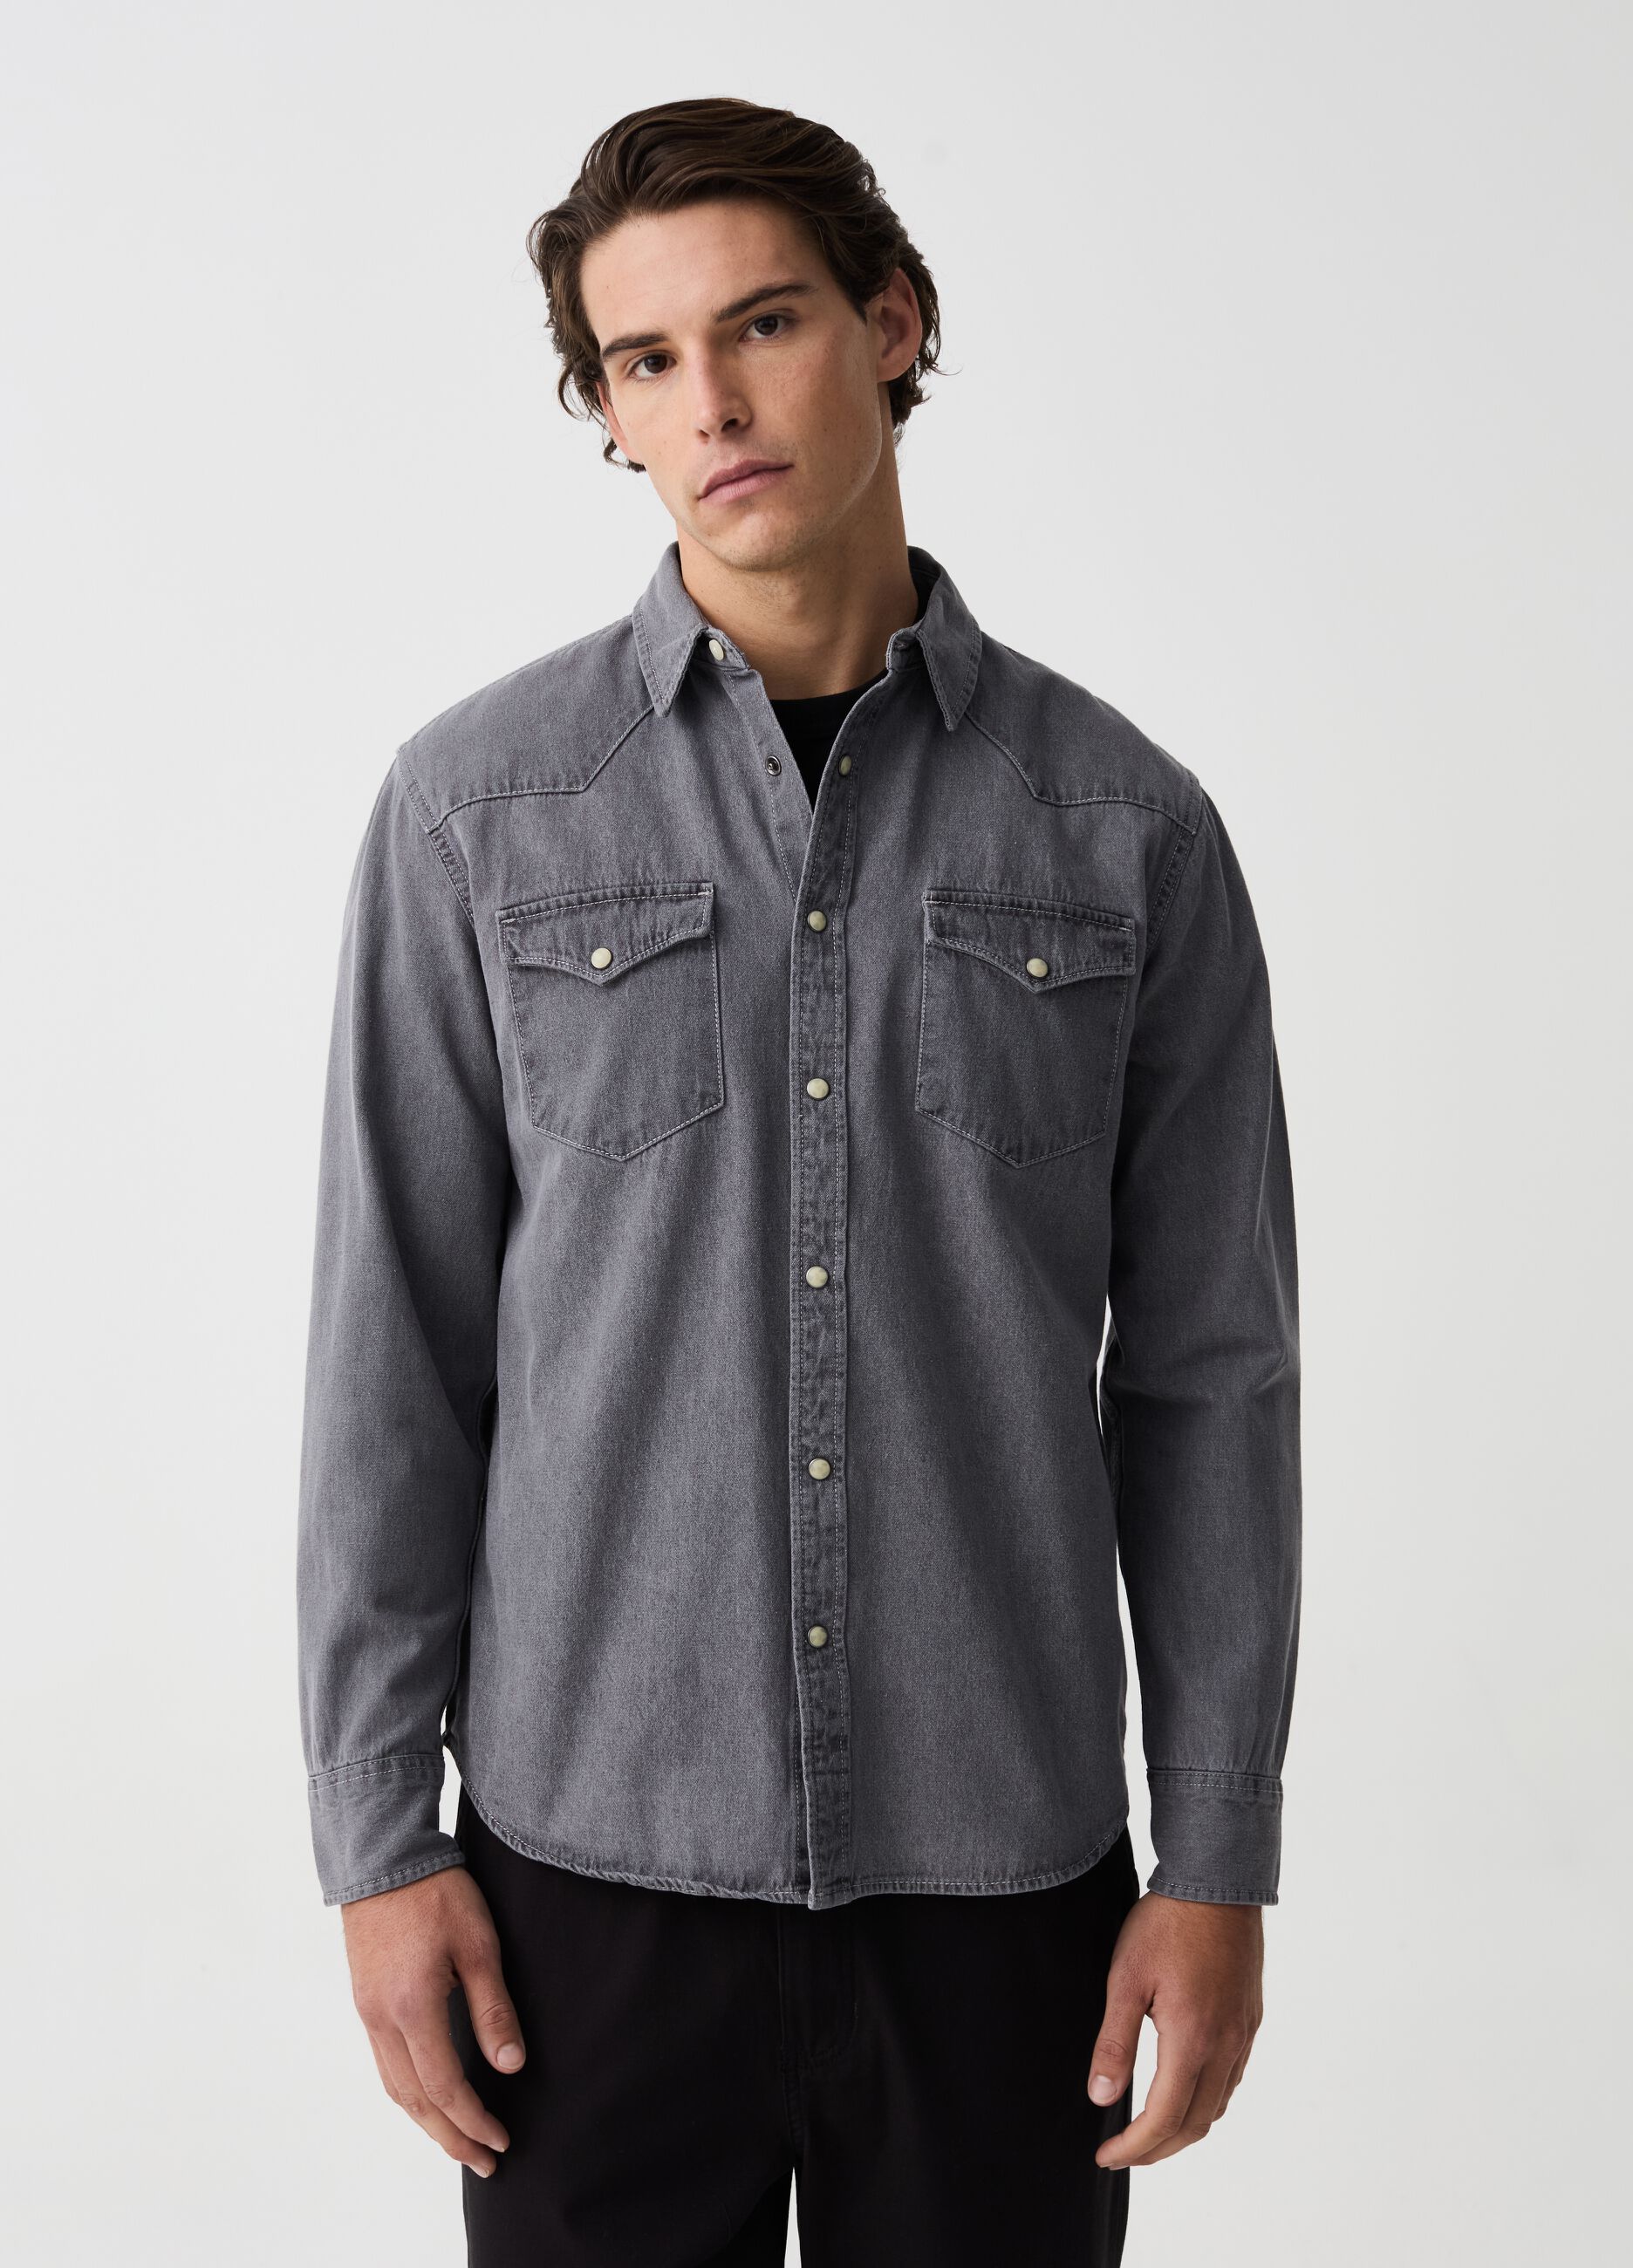 Western shirt in denim with pearl buttons